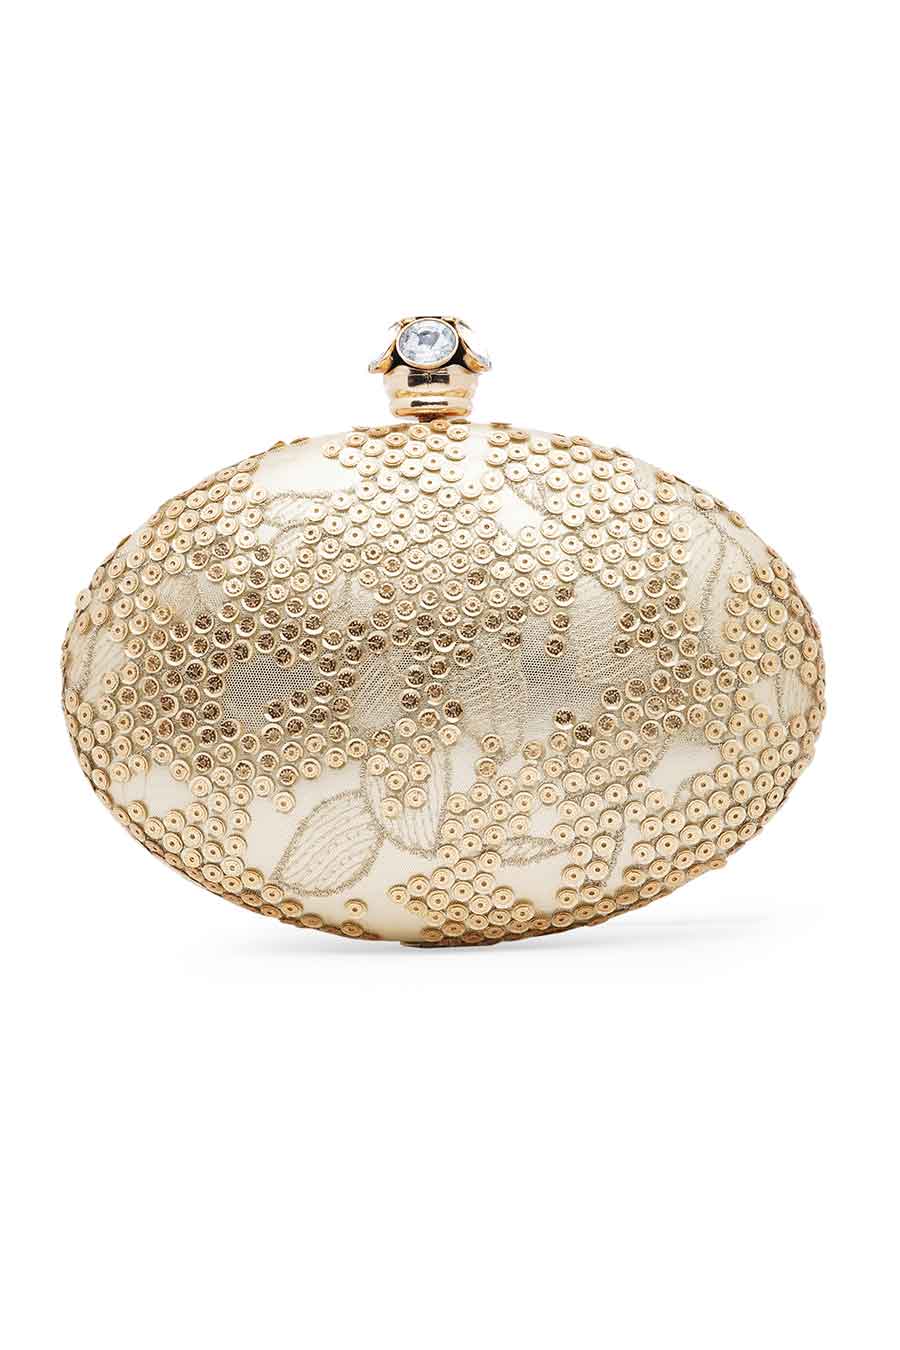 Gold Oval Embroidered Clutch